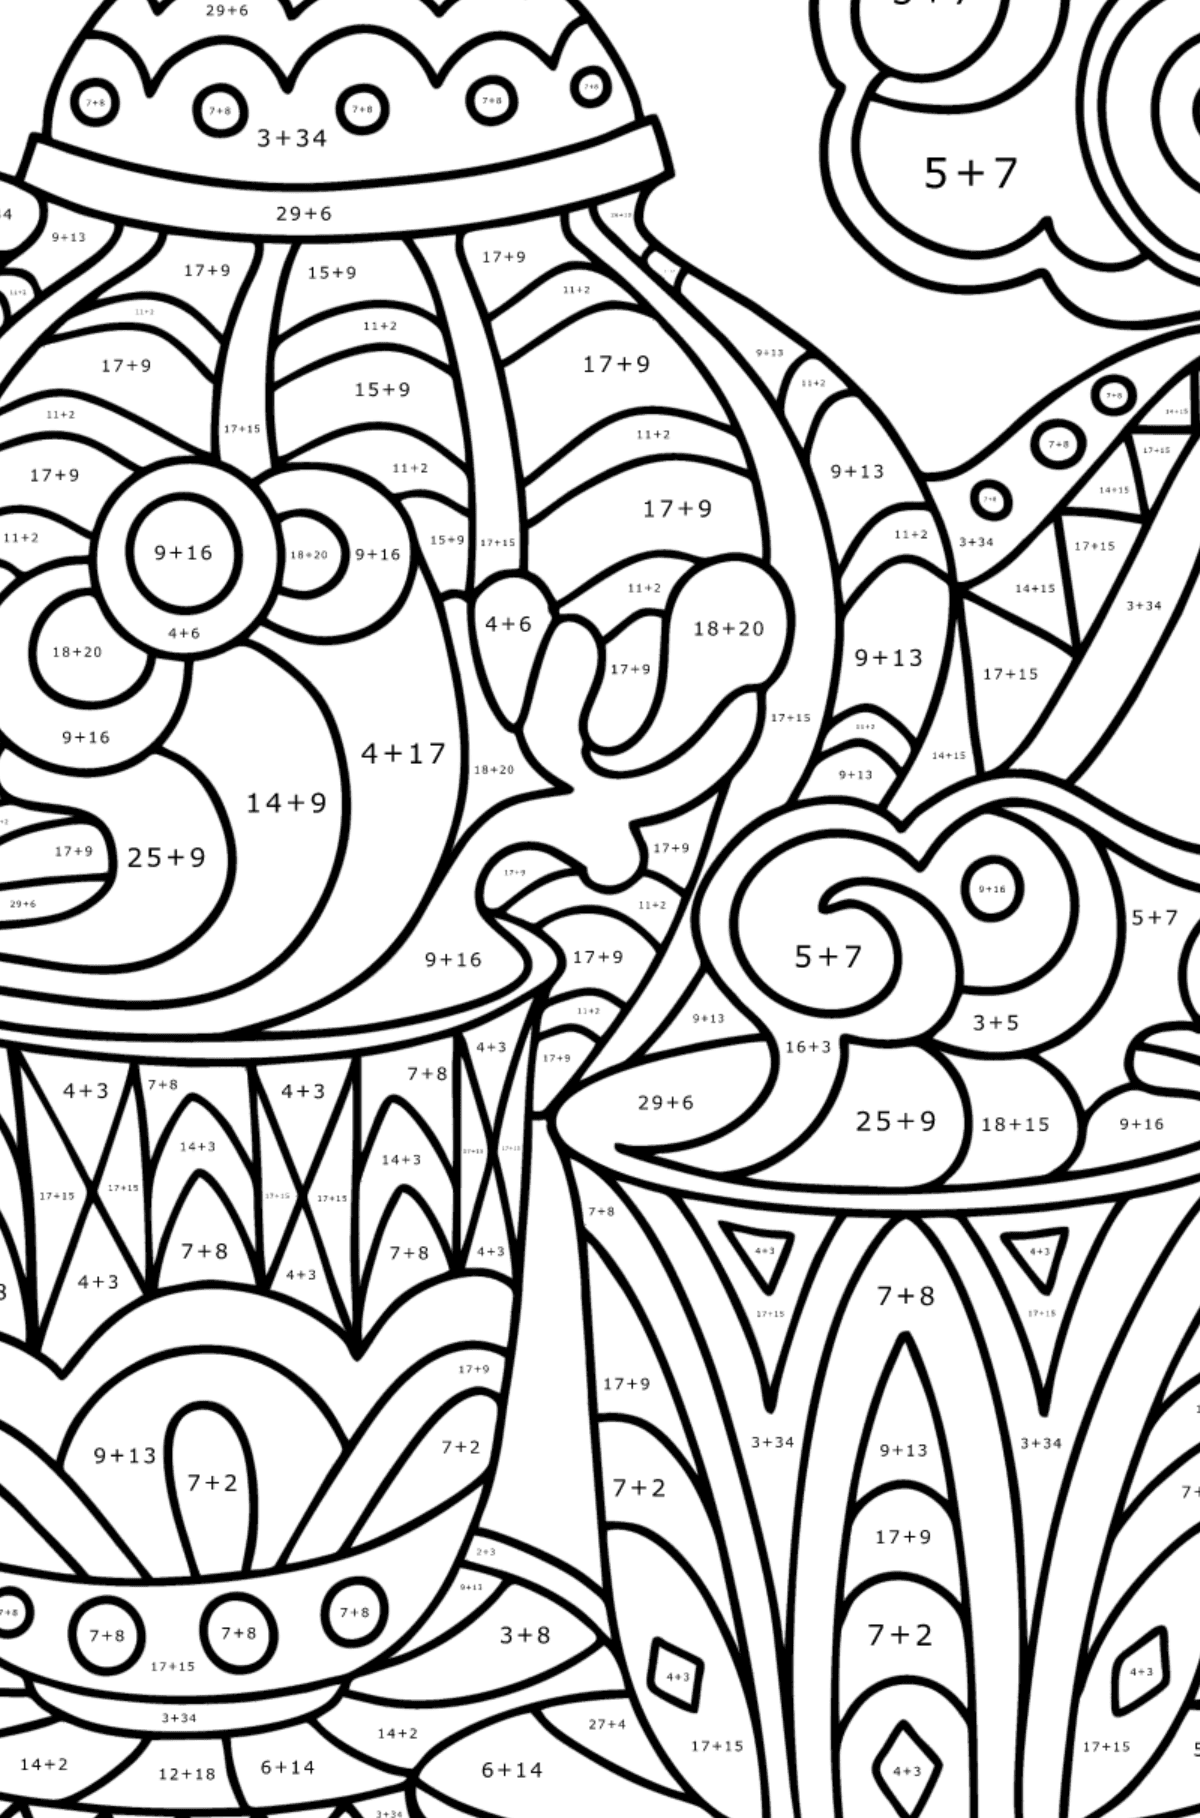 Doodle Coloring Page for Kids - Tea Party - Math Coloring - Addition for Kids